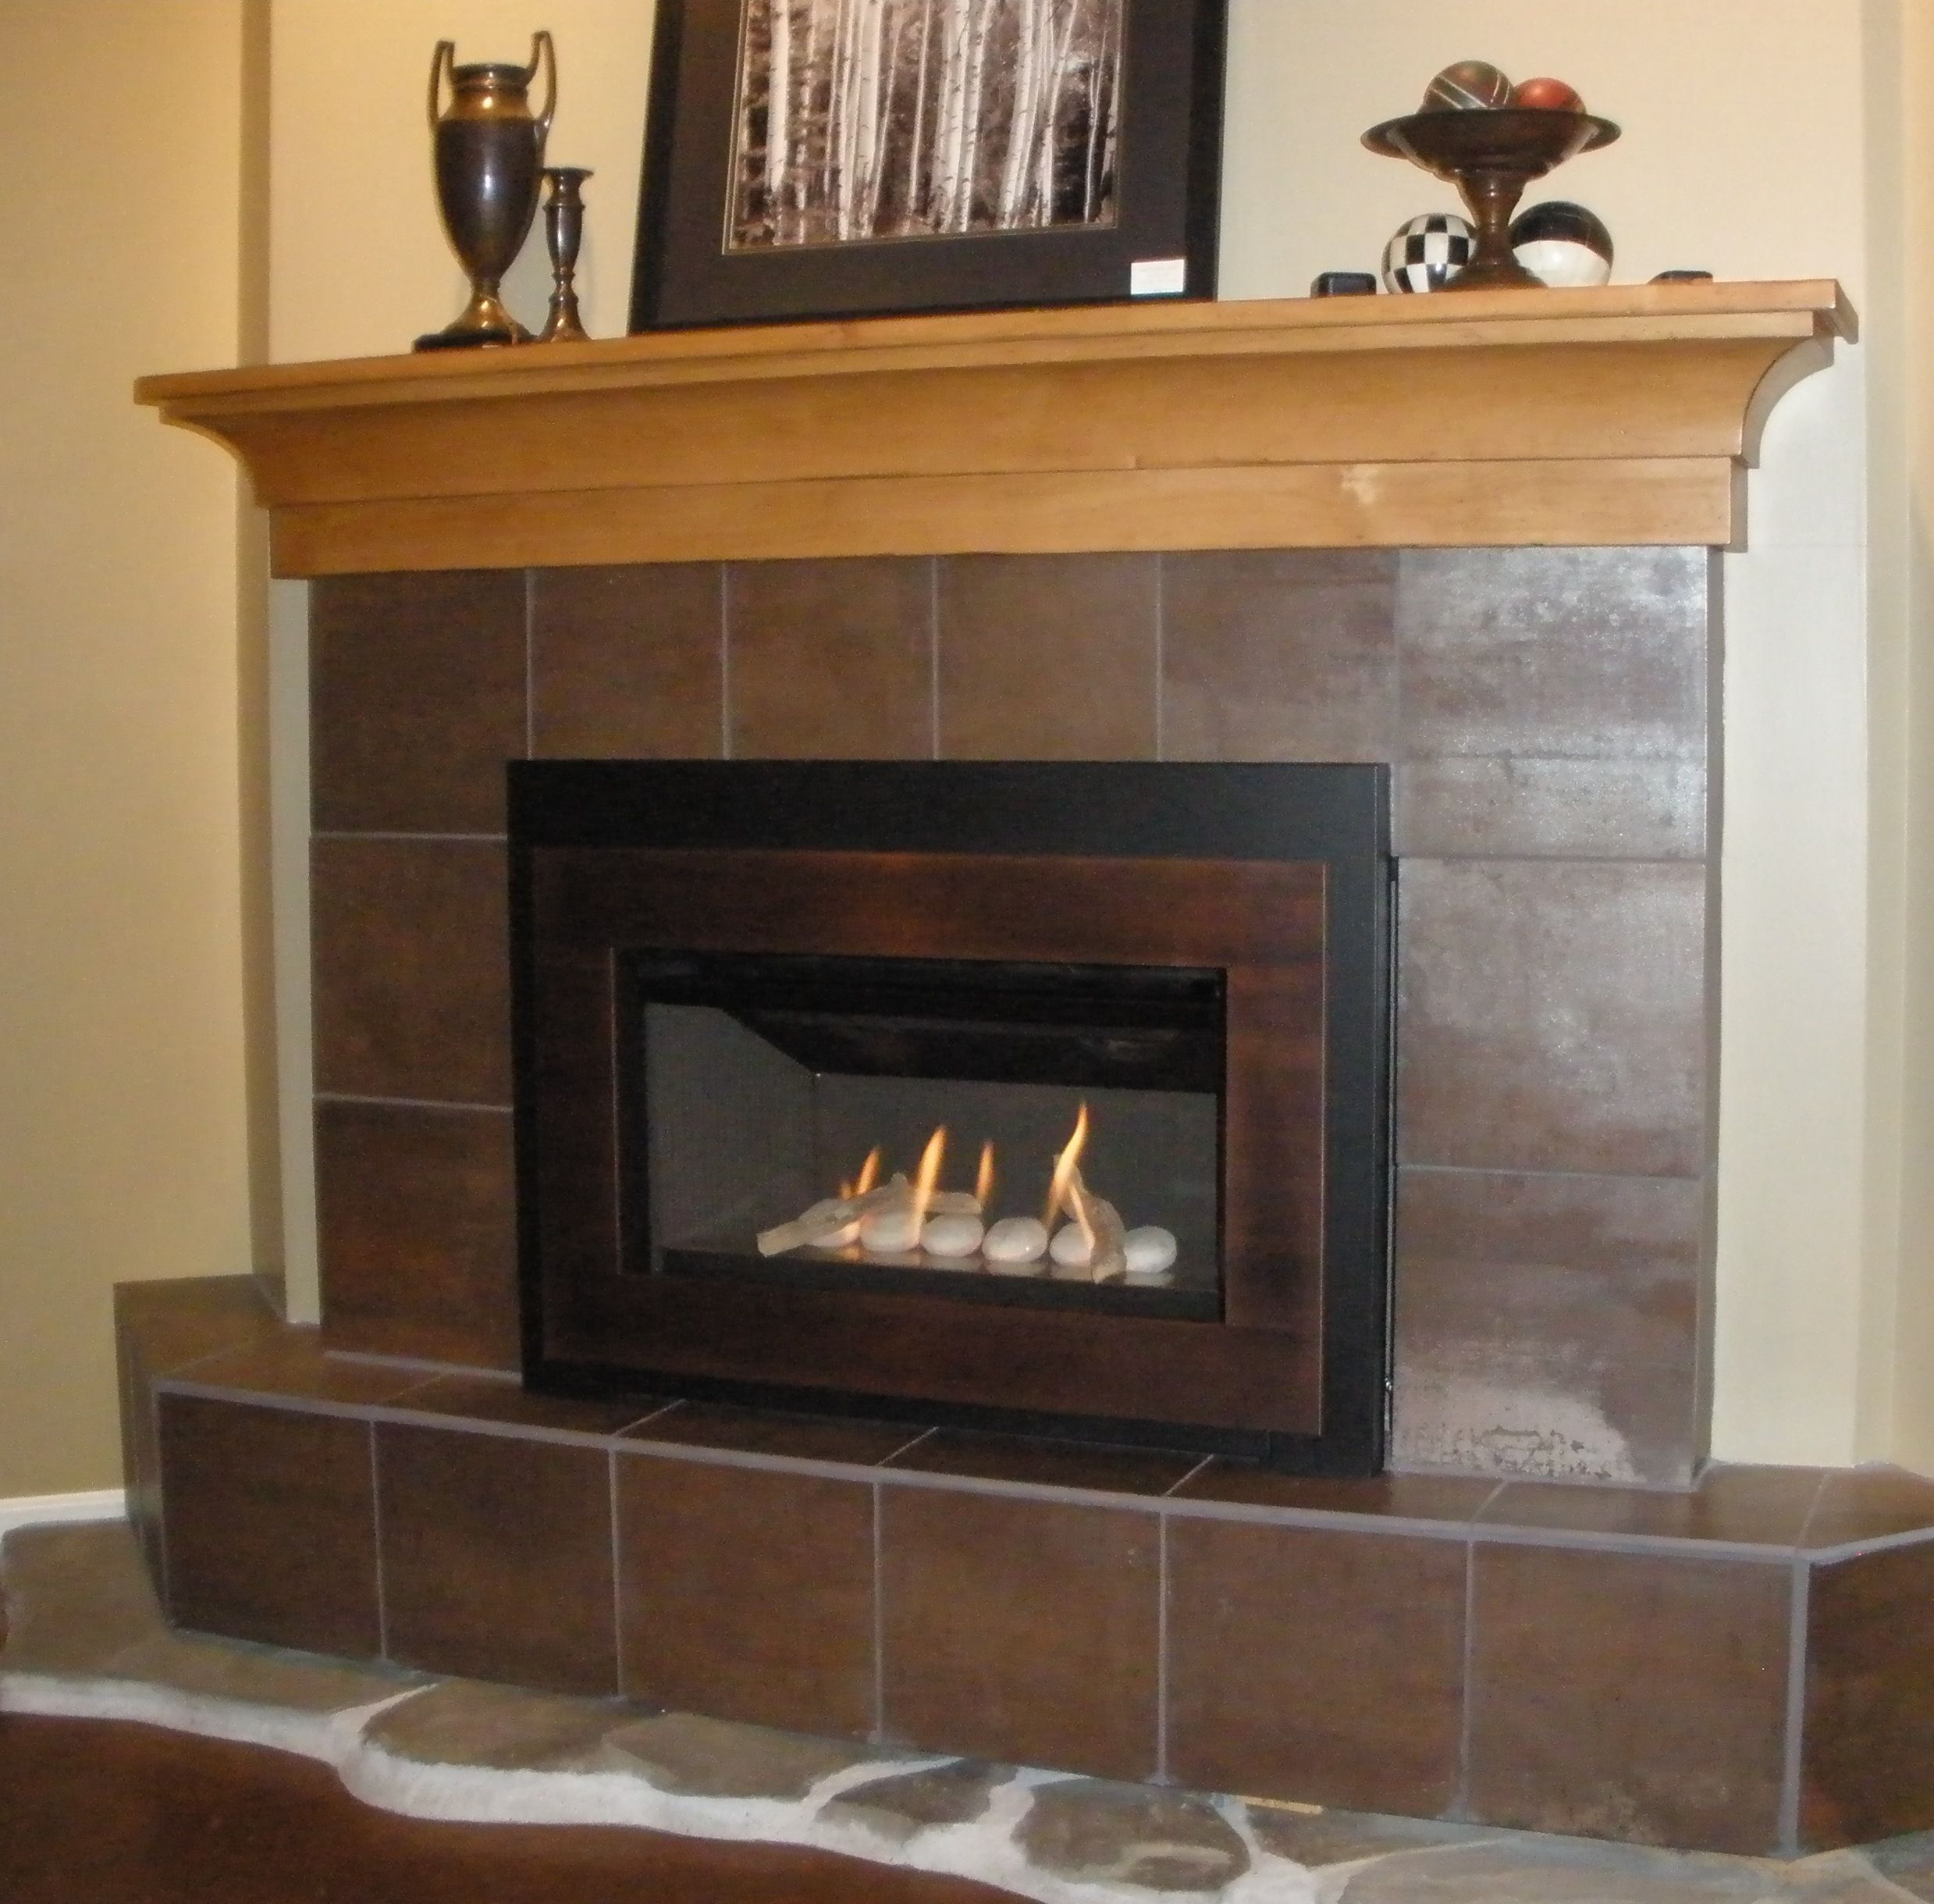 Fireplace Fresh Air Intake Vent Inspirational Pin On Valor Radiant Gas Fireplaces Midwest Dealer